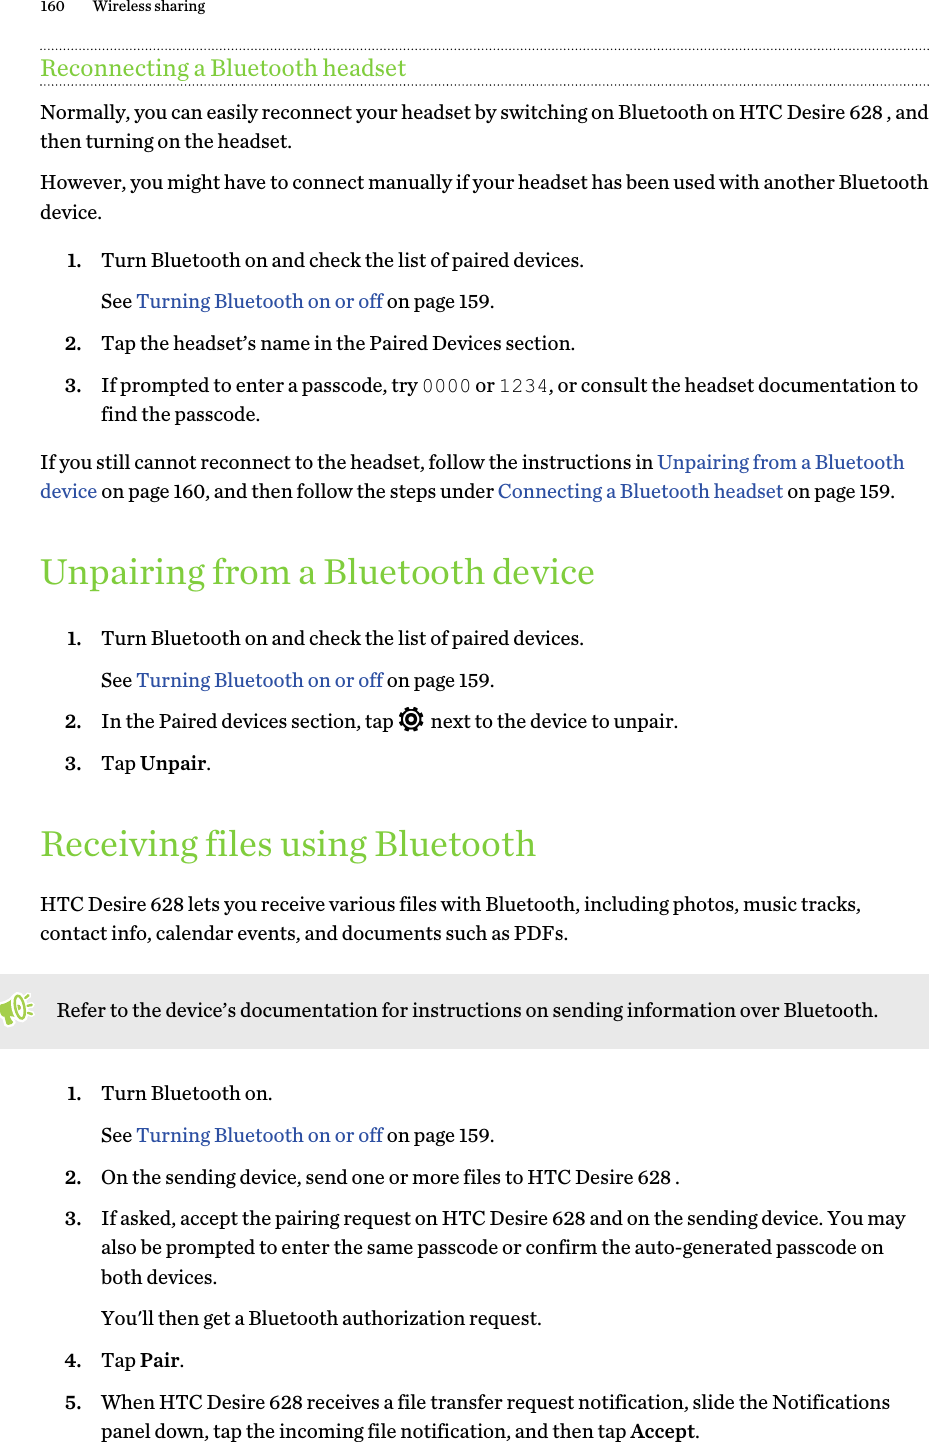 Reconnecting a Bluetooth headsetNormally, you can easily reconnect your headset by switching on Bluetooth on HTC Desire 628 , andthen turning on the headset.However, you might have to connect manually if your headset has been used with another Bluetoothdevice.1. Turn Bluetooth on and check the list of paired devices. See Turning Bluetooth on or off on page 159.2. Tap the headset’s name in the Paired Devices section.3. If prompted to enter a passcode, try 0000 or 1234, or consult the headset documentation tofind the passcode.If you still cannot reconnect to the headset, follow the instructions in Unpairing from a Bluetoothdevice on page 160, and then follow the steps under Connecting a Bluetooth headset on page 159.Unpairing from a Bluetooth device1. Turn Bluetooth on and check the list of paired devices. See Turning Bluetooth on or off on page 159.2. In the Paired devices section, tap   next to the device to unpair.3. Tap Unpair.Receiving files using BluetoothHTC Desire 628 lets you receive various files with Bluetooth, including photos, music tracks,contact info, calendar events, and documents such as PDFs.Refer to the device’s documentation for instructions on sending information over Bluetooth.1. Turn Bluetooth on. See Turning Bluetooth on or off on page 159.2. On the sending device, send one or more files to HTC Desire 628 .3. If asked, accept the pairing request on HTC Desire 628 and on the sending device. You mayalso be prompted to enter the same passcode or confirm the auto-generated passcode onboth devices. You&apos;ll then get a Bluetooth authorization request.4. Tap Pair.5. When HTC Desire 628 receives a file transfer request notification, slide the Notificationspanel down, tap the incoming file notification, and then tap Accept.160 Wireless sharing